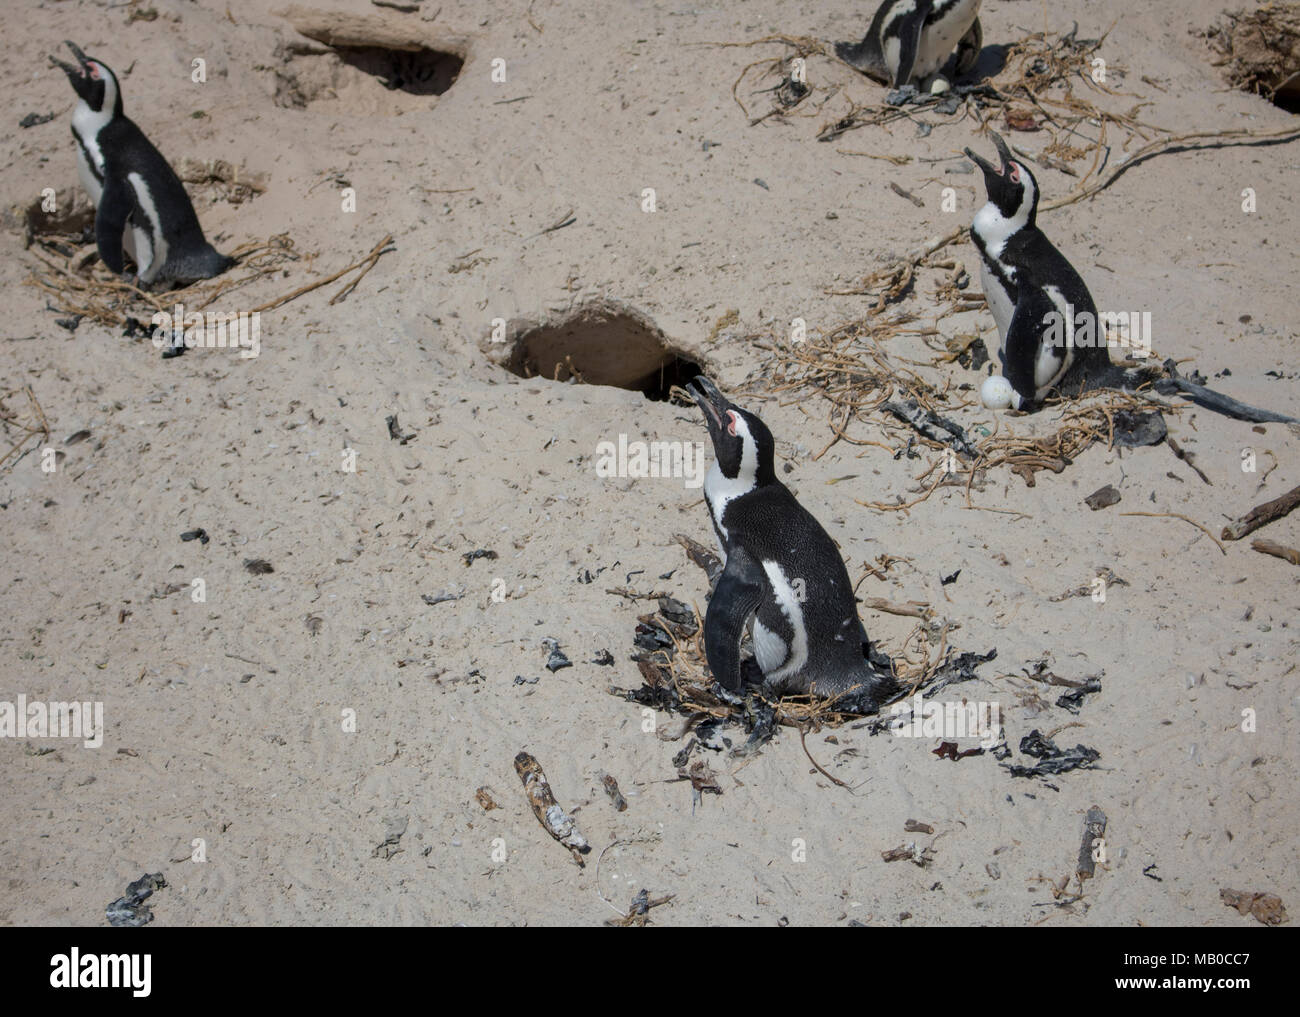 Penguins at the beach in a sunny day in South Africa Stock Photo